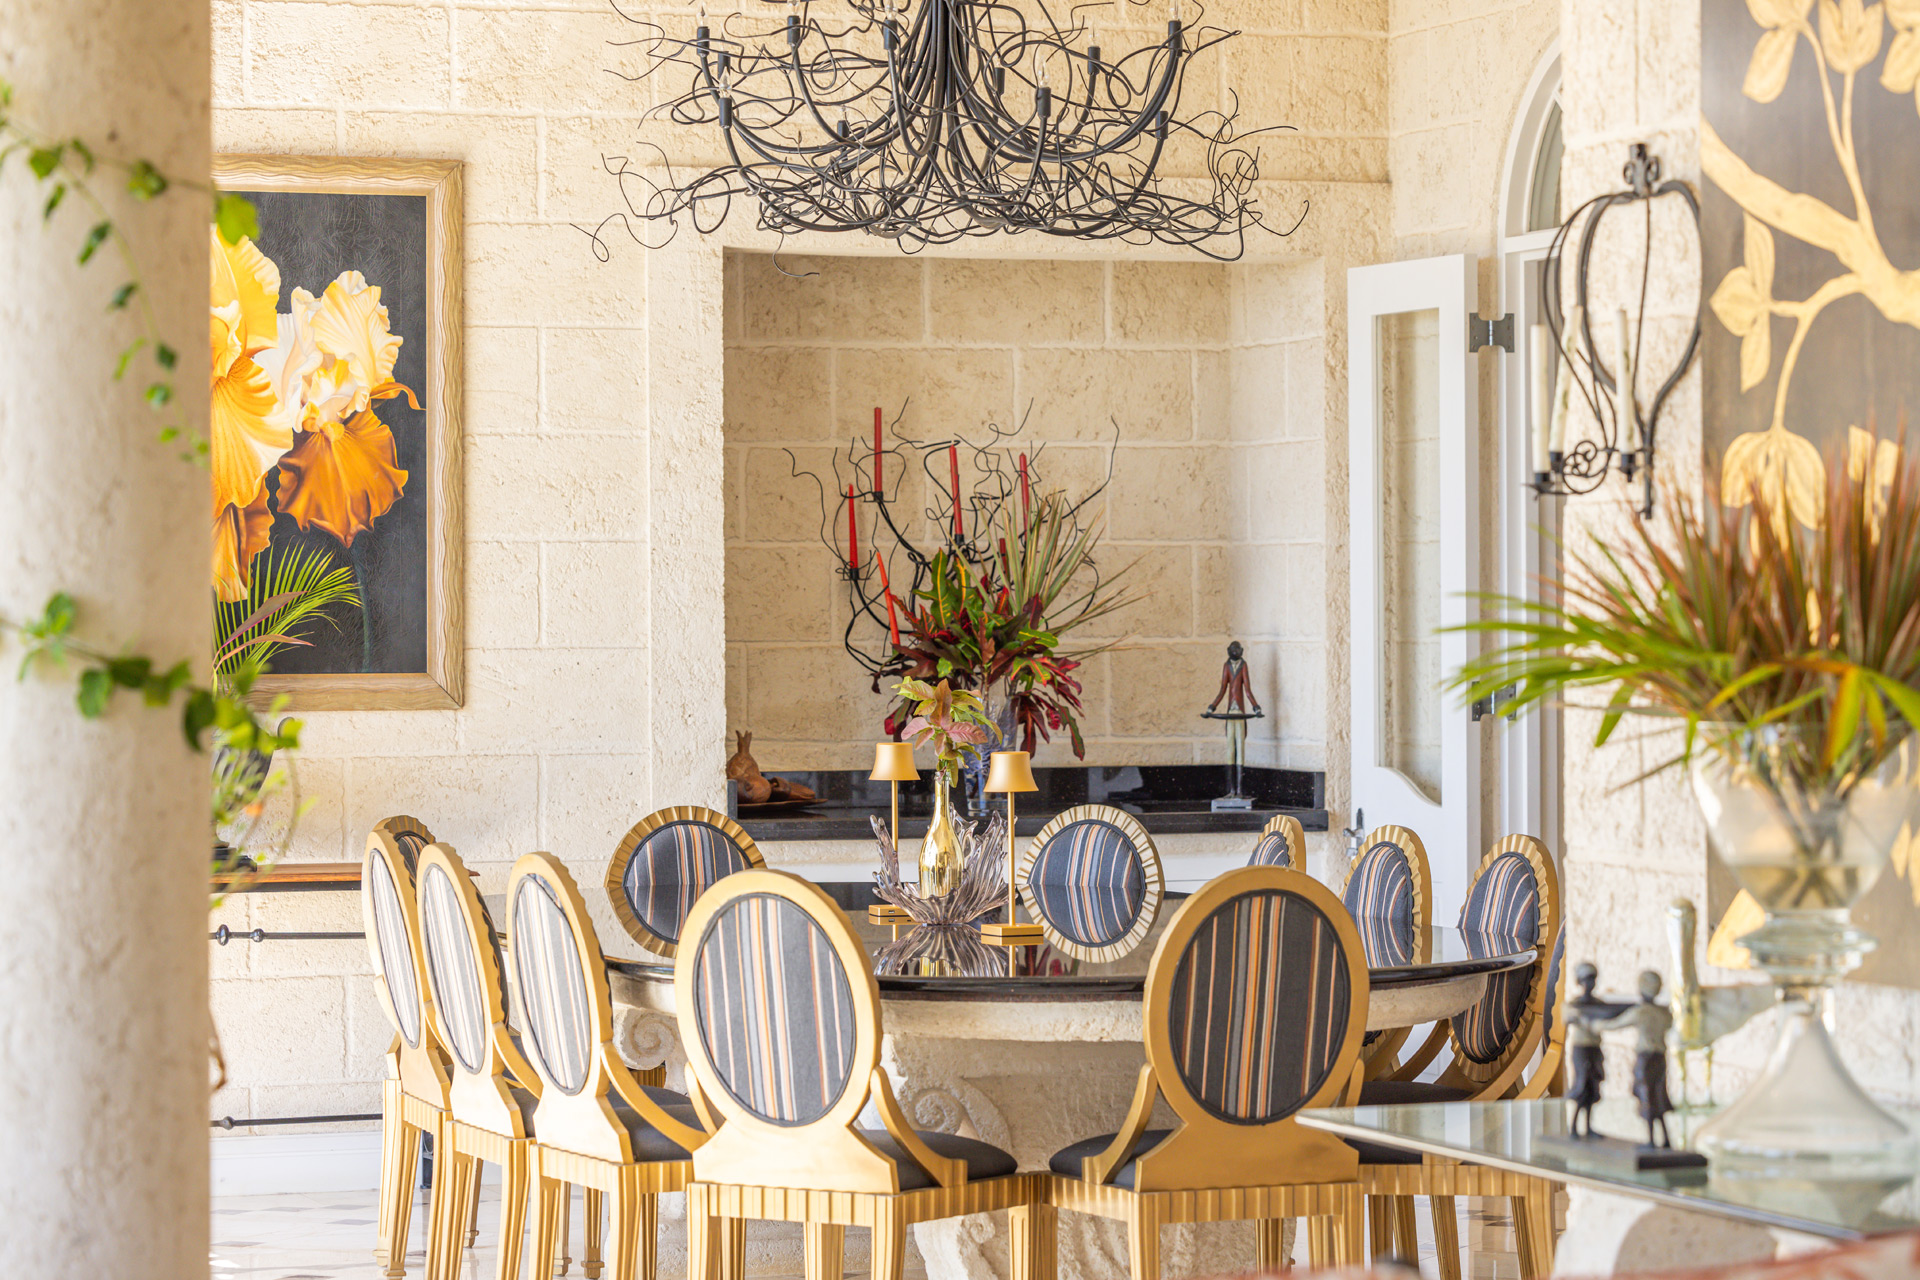 Outdoor dining area with gold-framed chairs and marble tiles.